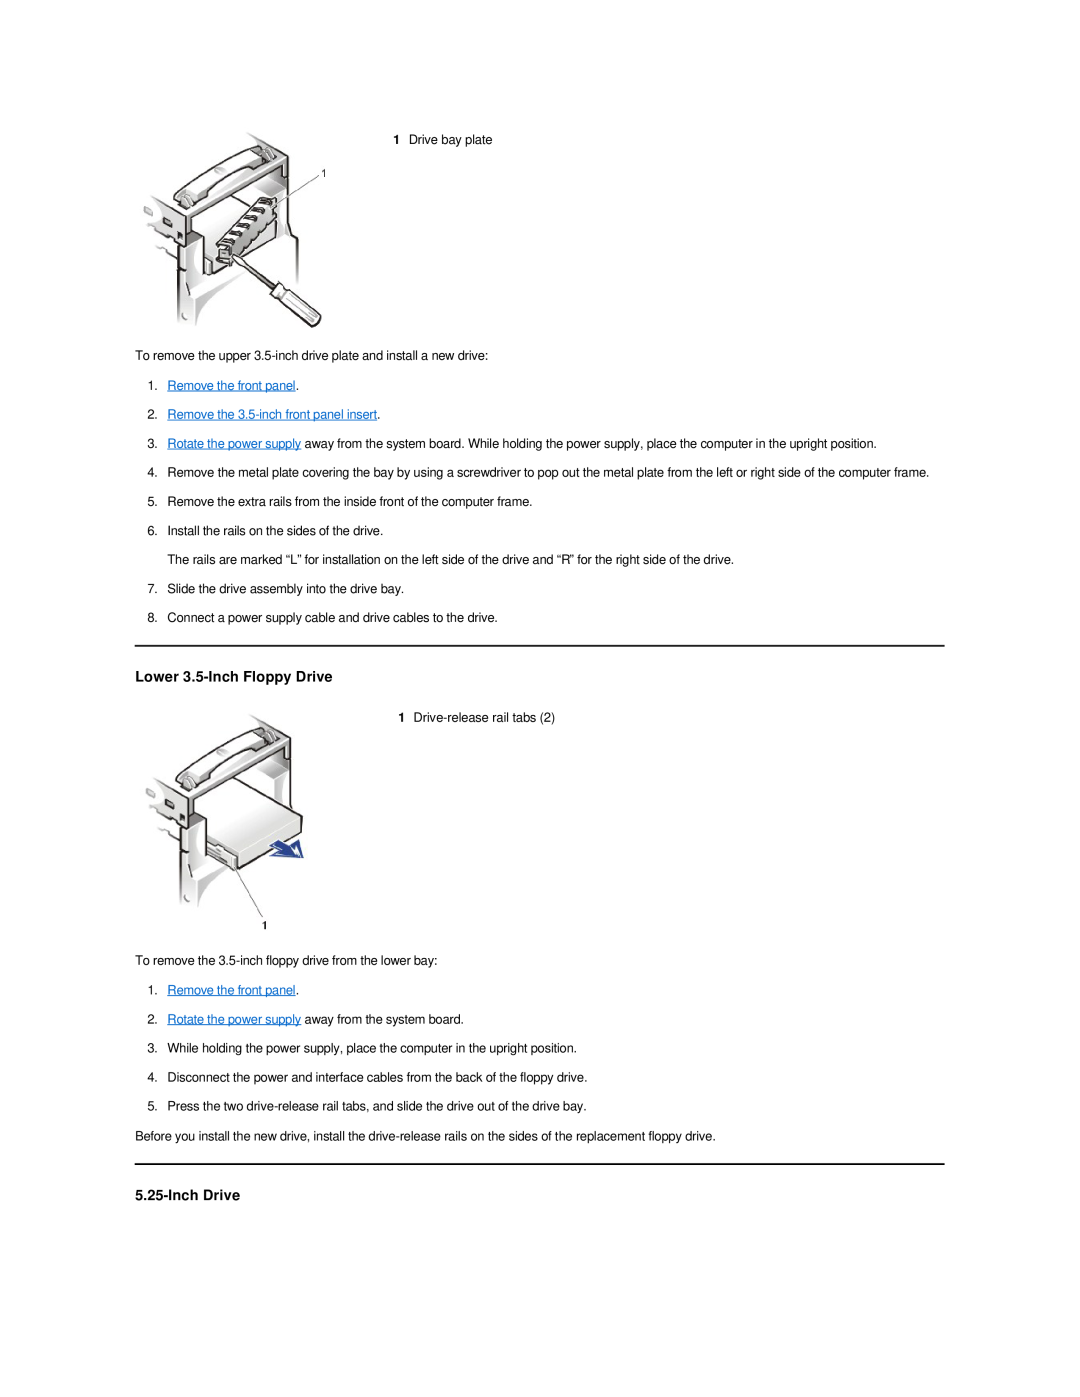 Dell Dimension 2100 technical specifications Lower 3.5-Inch Floppy Drive, Inch Drive, Remove the front panel 